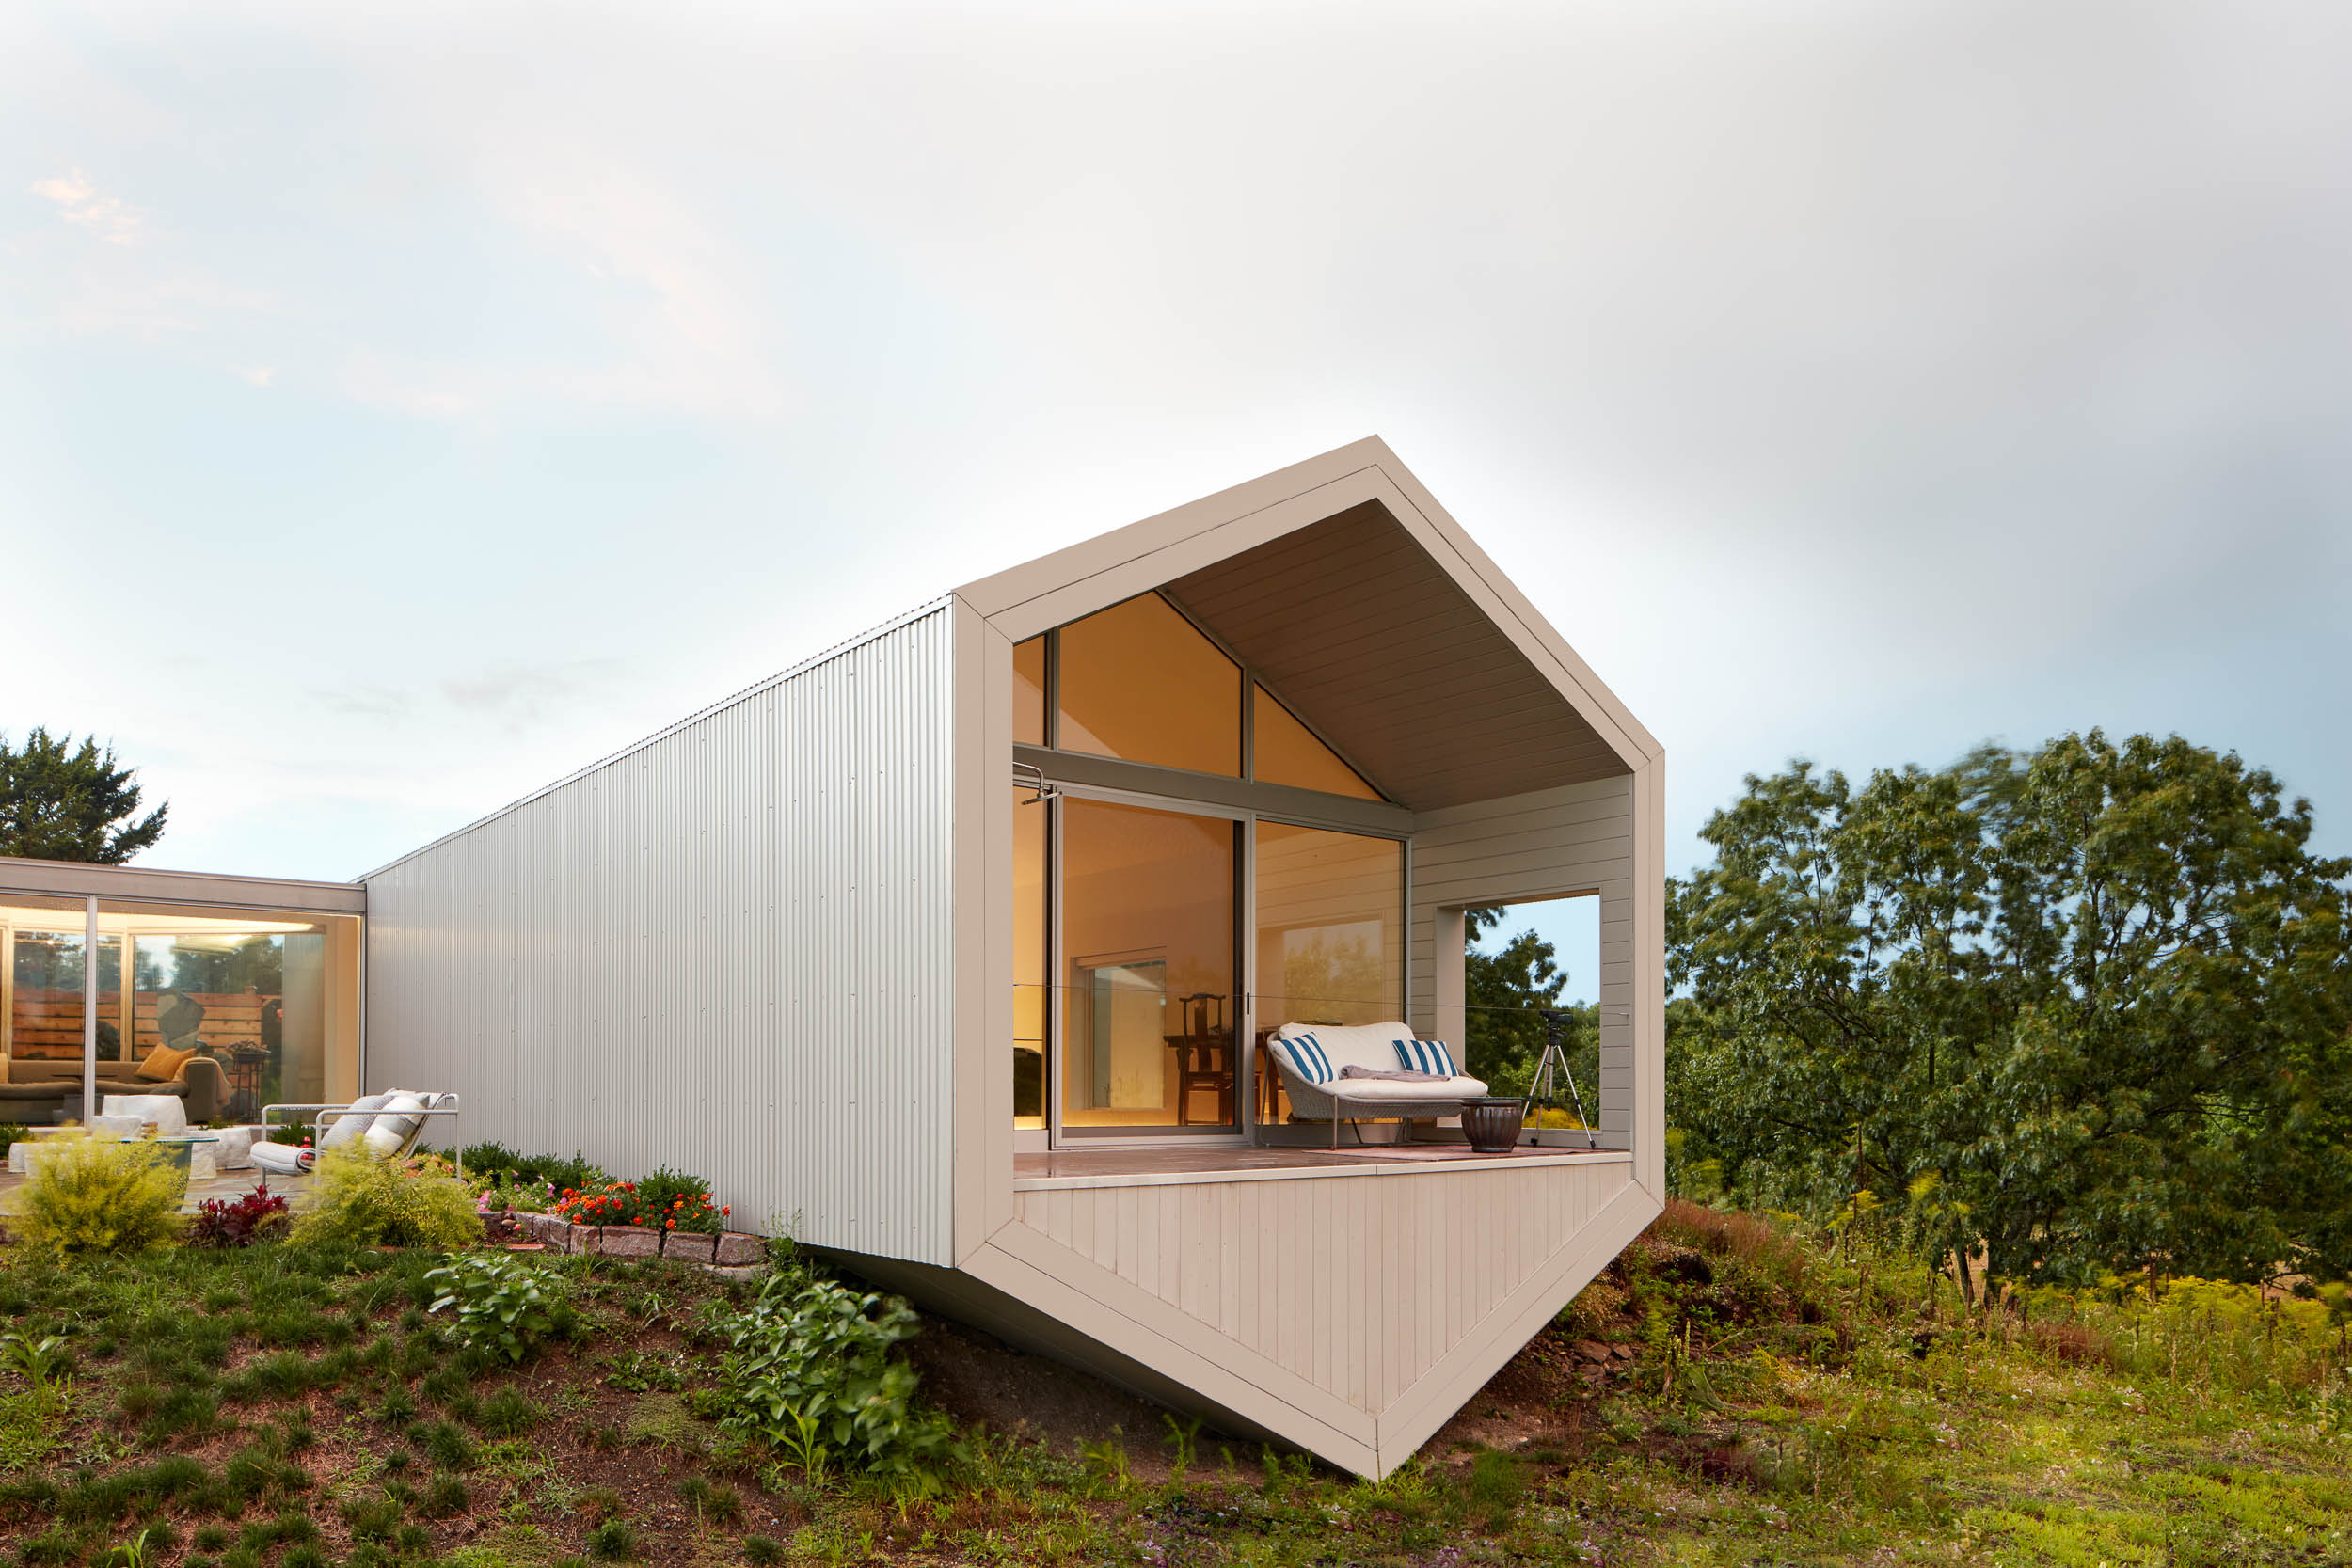 Hexagonal house designed by Ai Weiwei in upstate New York